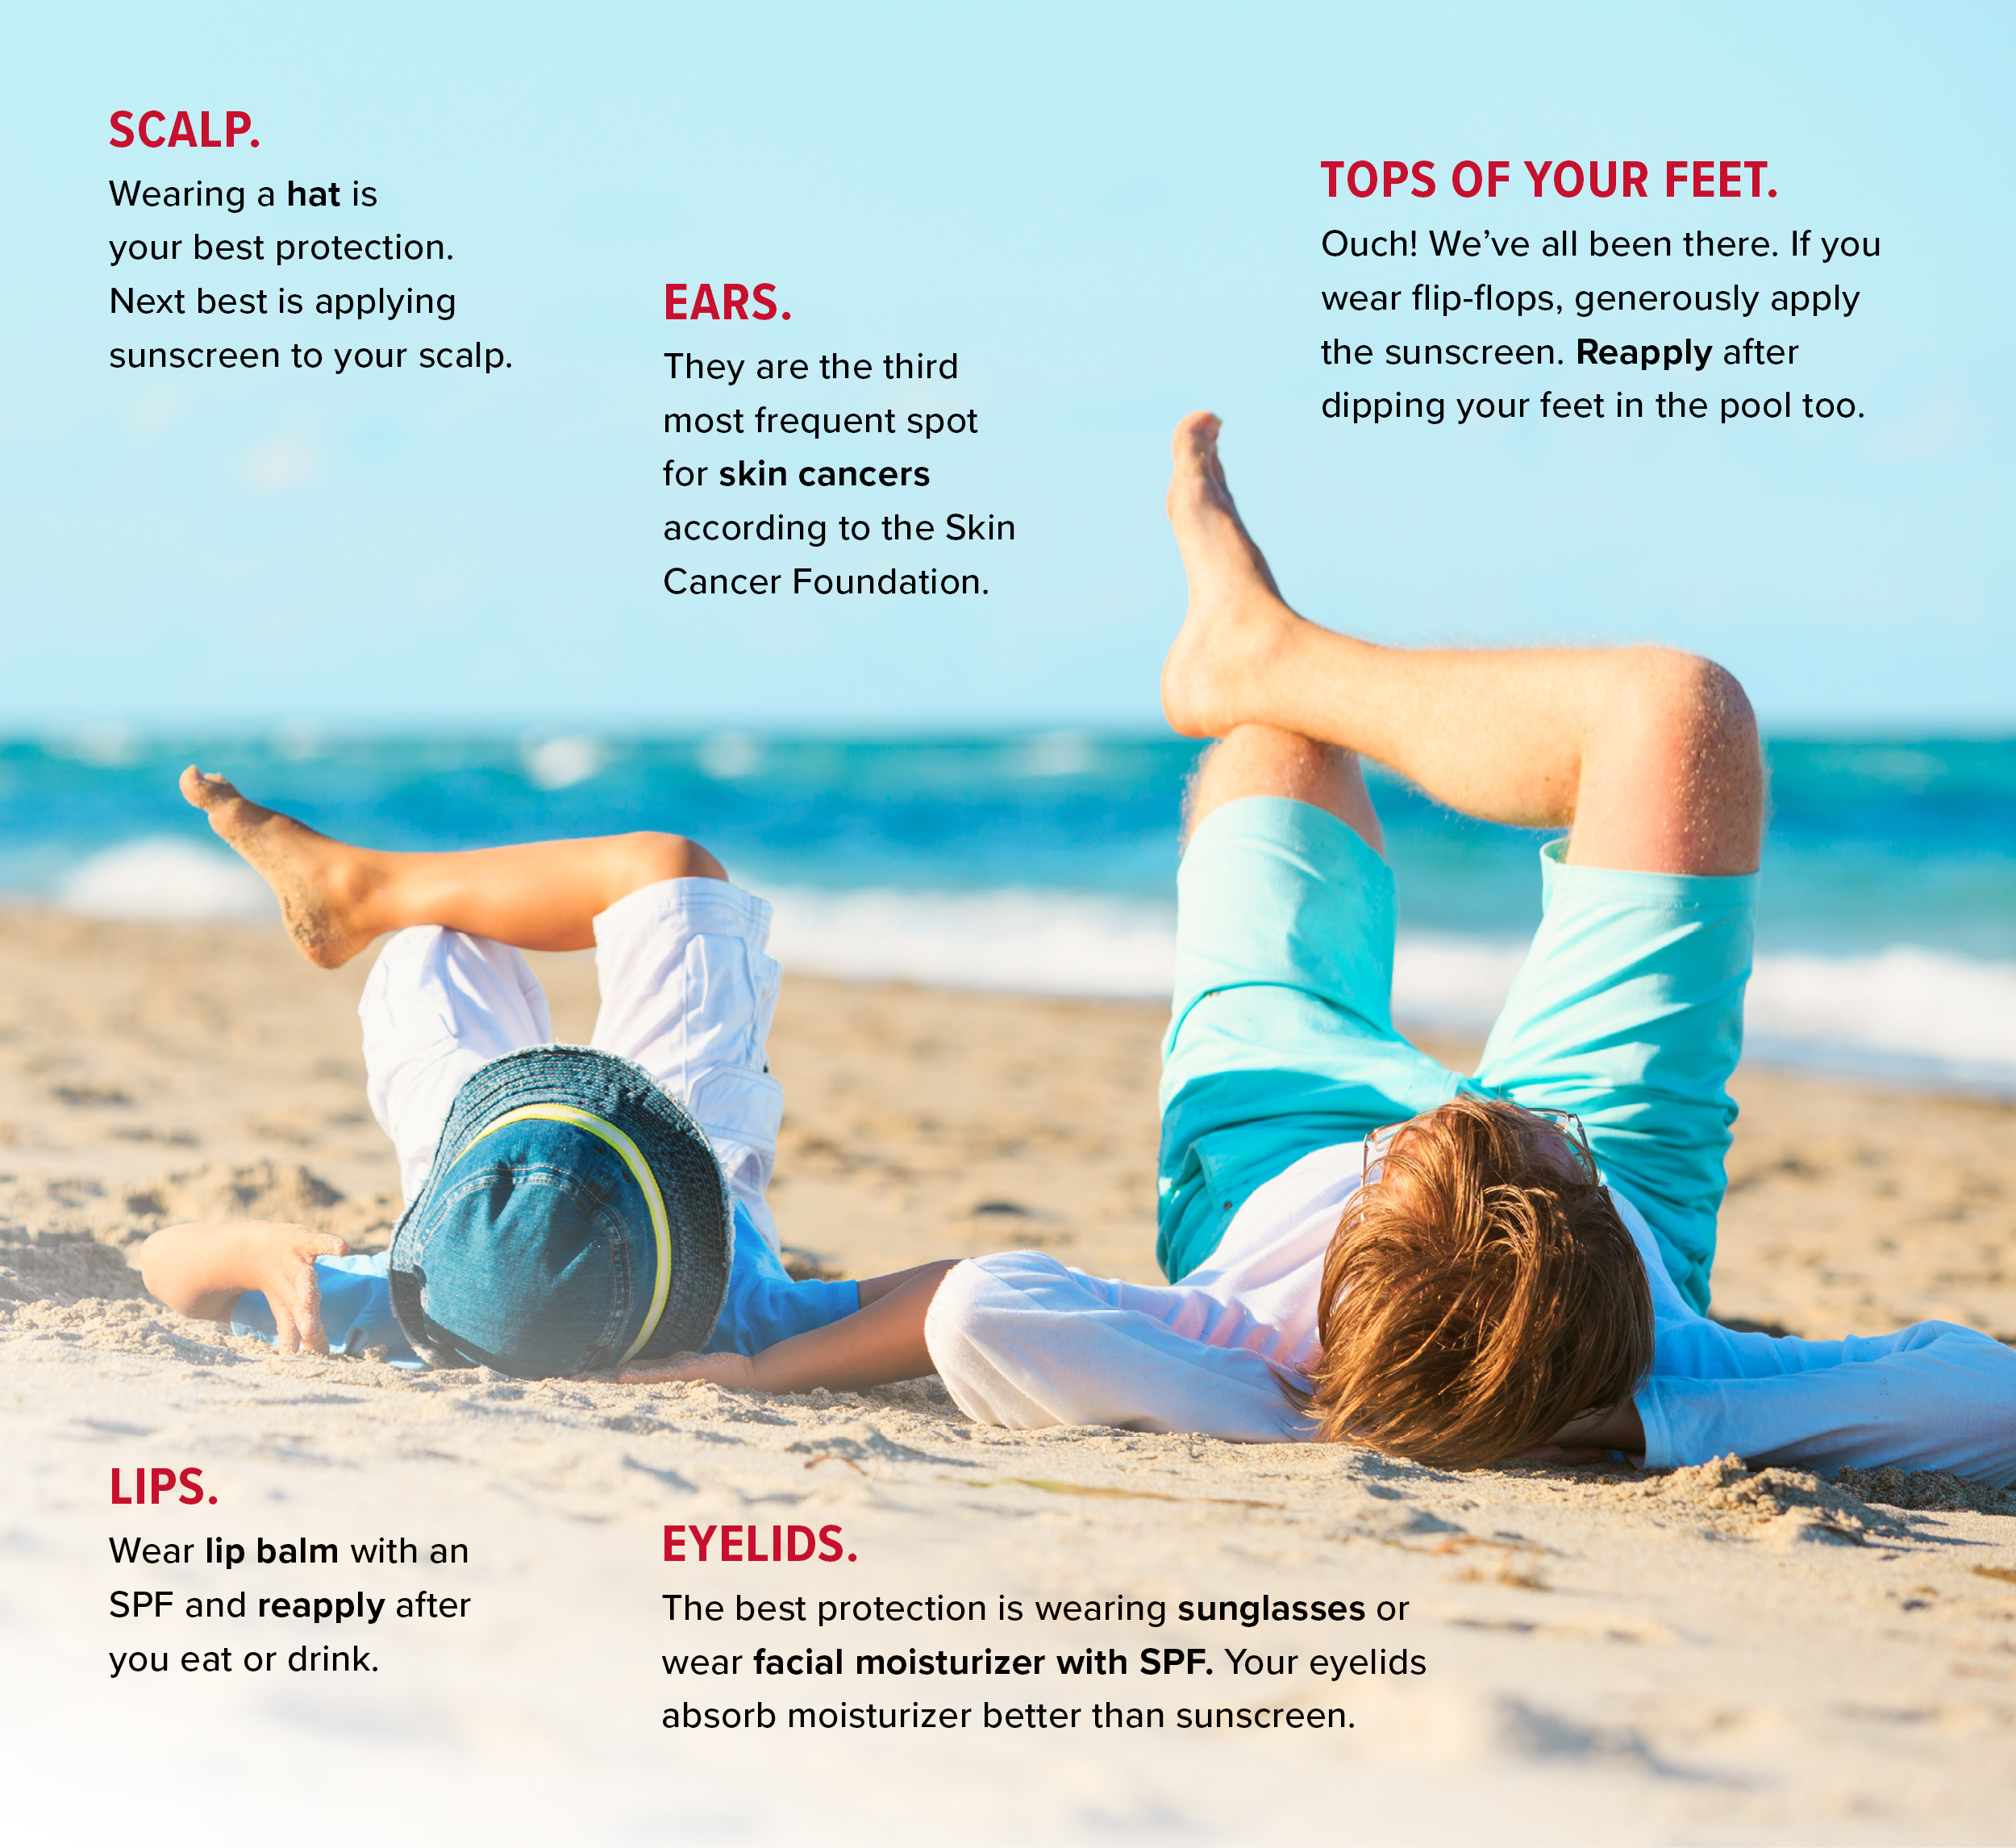 The scalp, ears, lips, eyelids, and tops of feet are five places to remember to put sunscreen